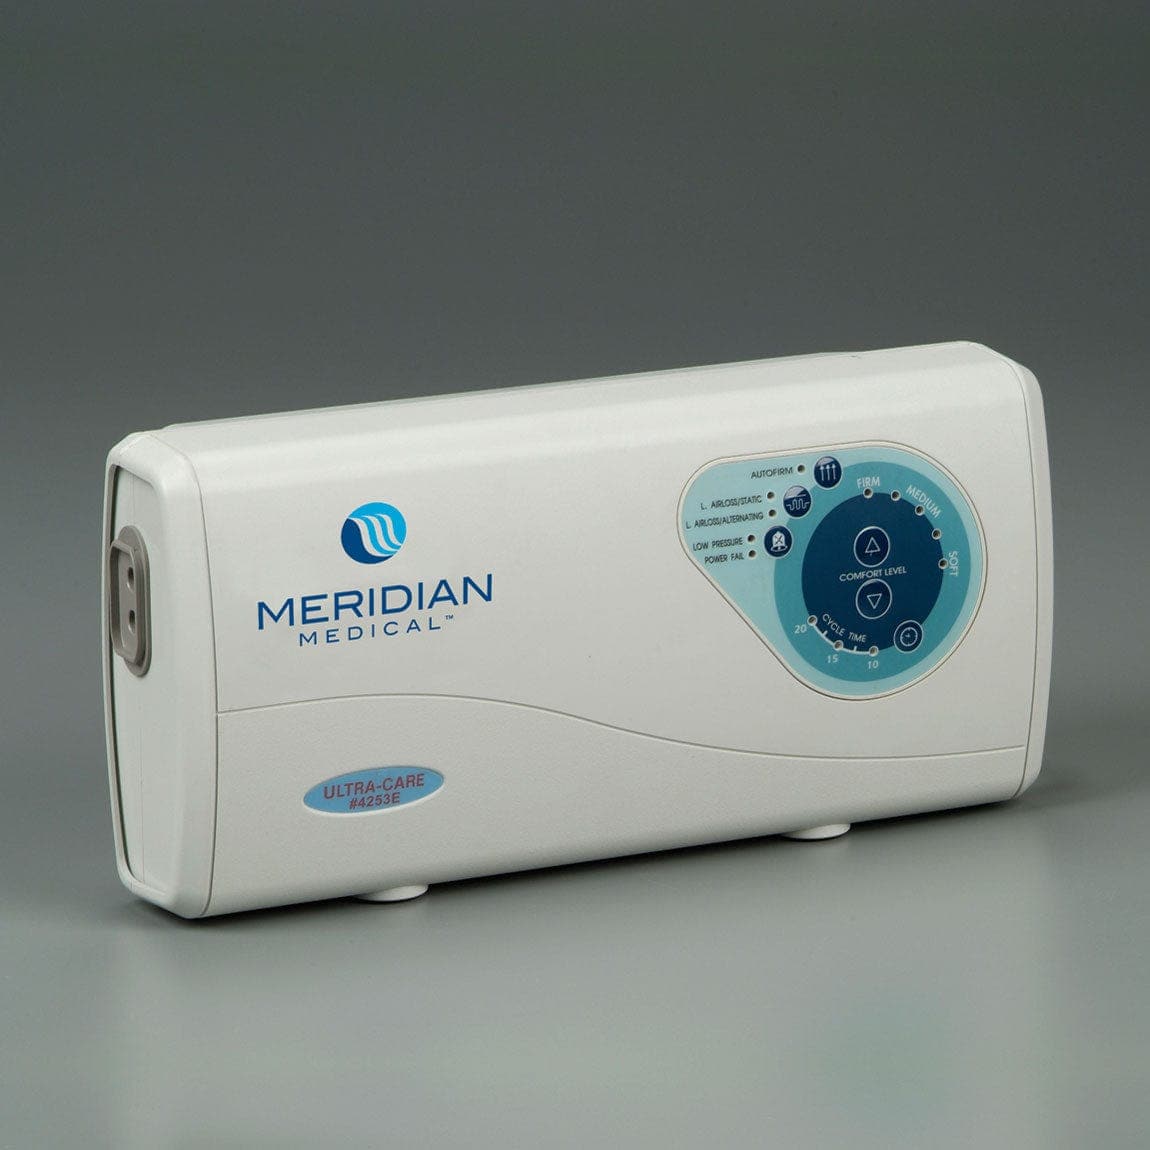 Compass Health Group II Compass Health Meridian Ultra-Care Perimeter Plus System